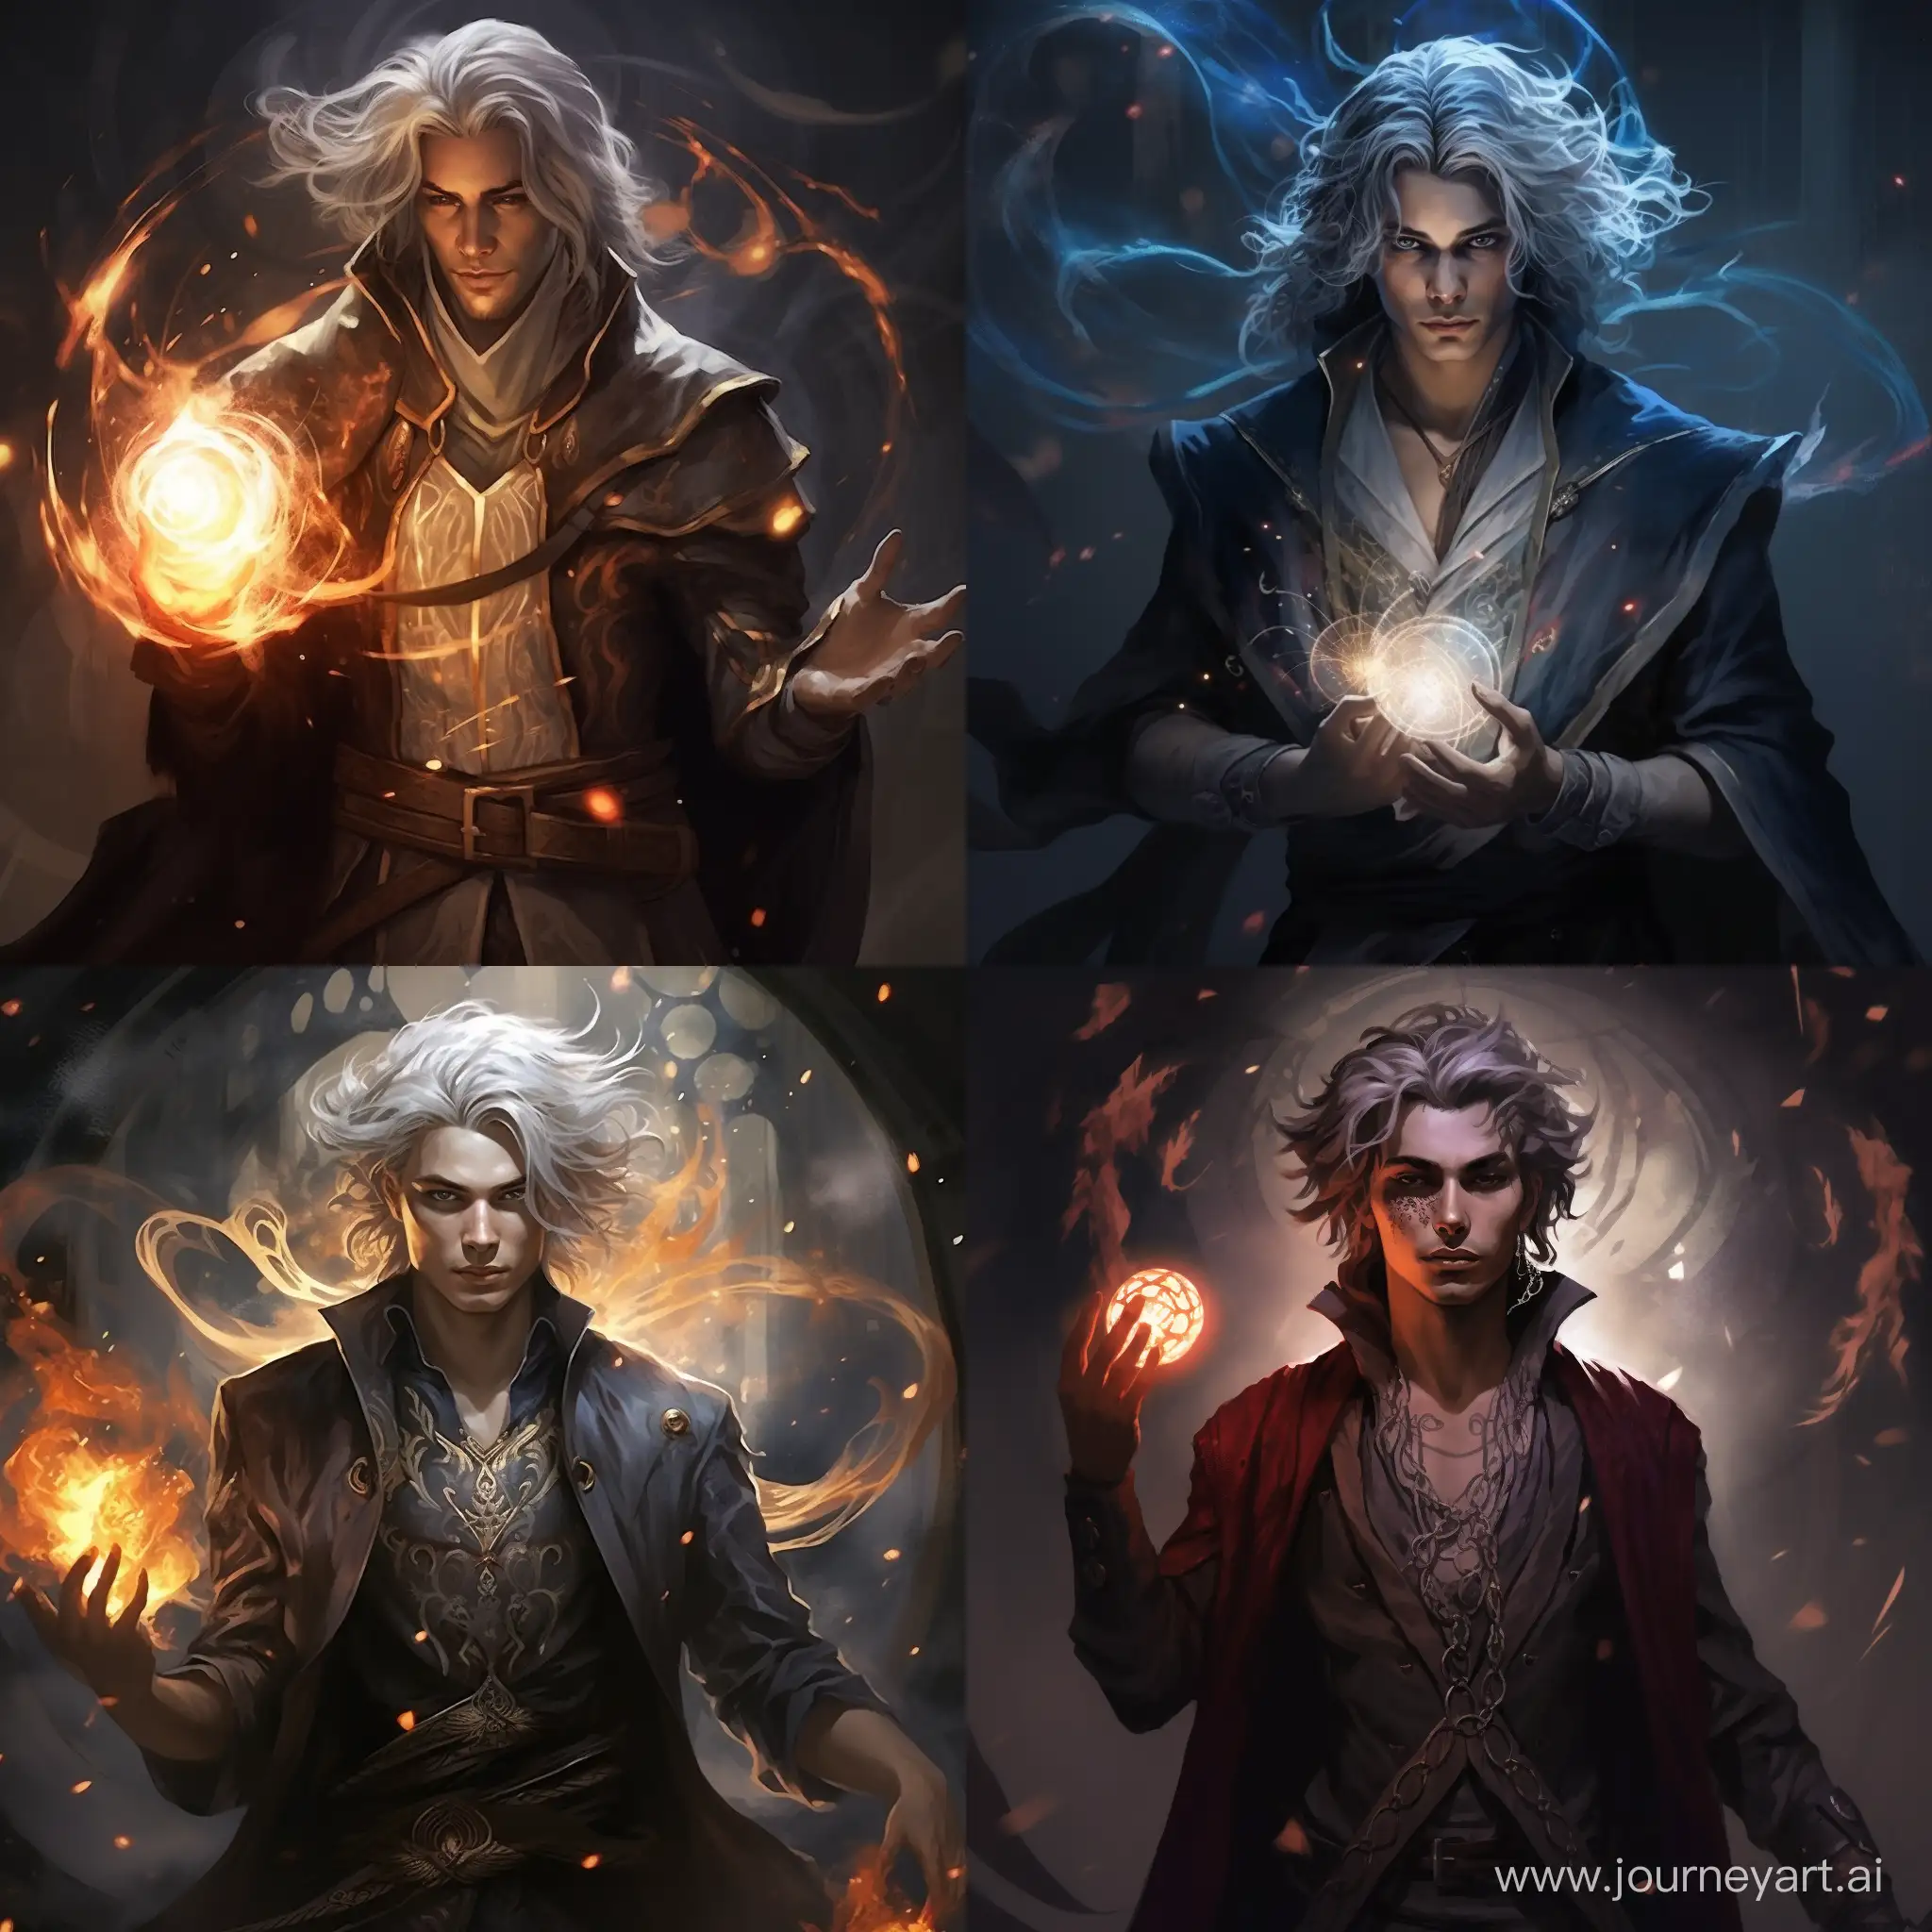 Create a drawing of a fantasy divine sorcerer that gets his powers from his fey ancestry (he’s human)